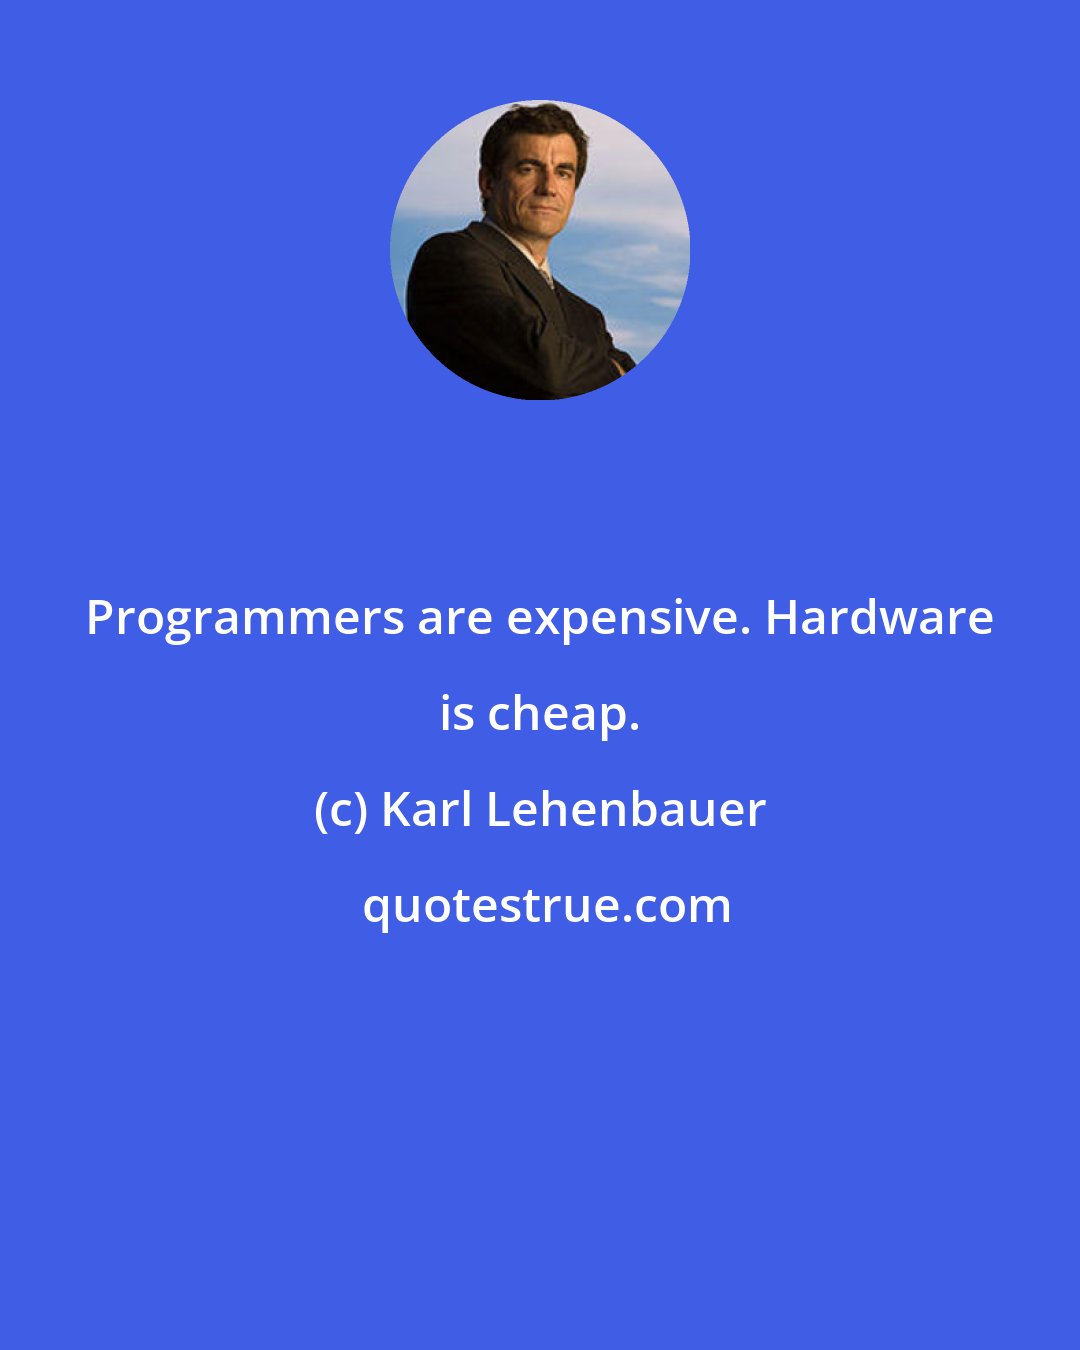 Karl Lehenbauer: Programmers are expensive. Hardware is cheap.